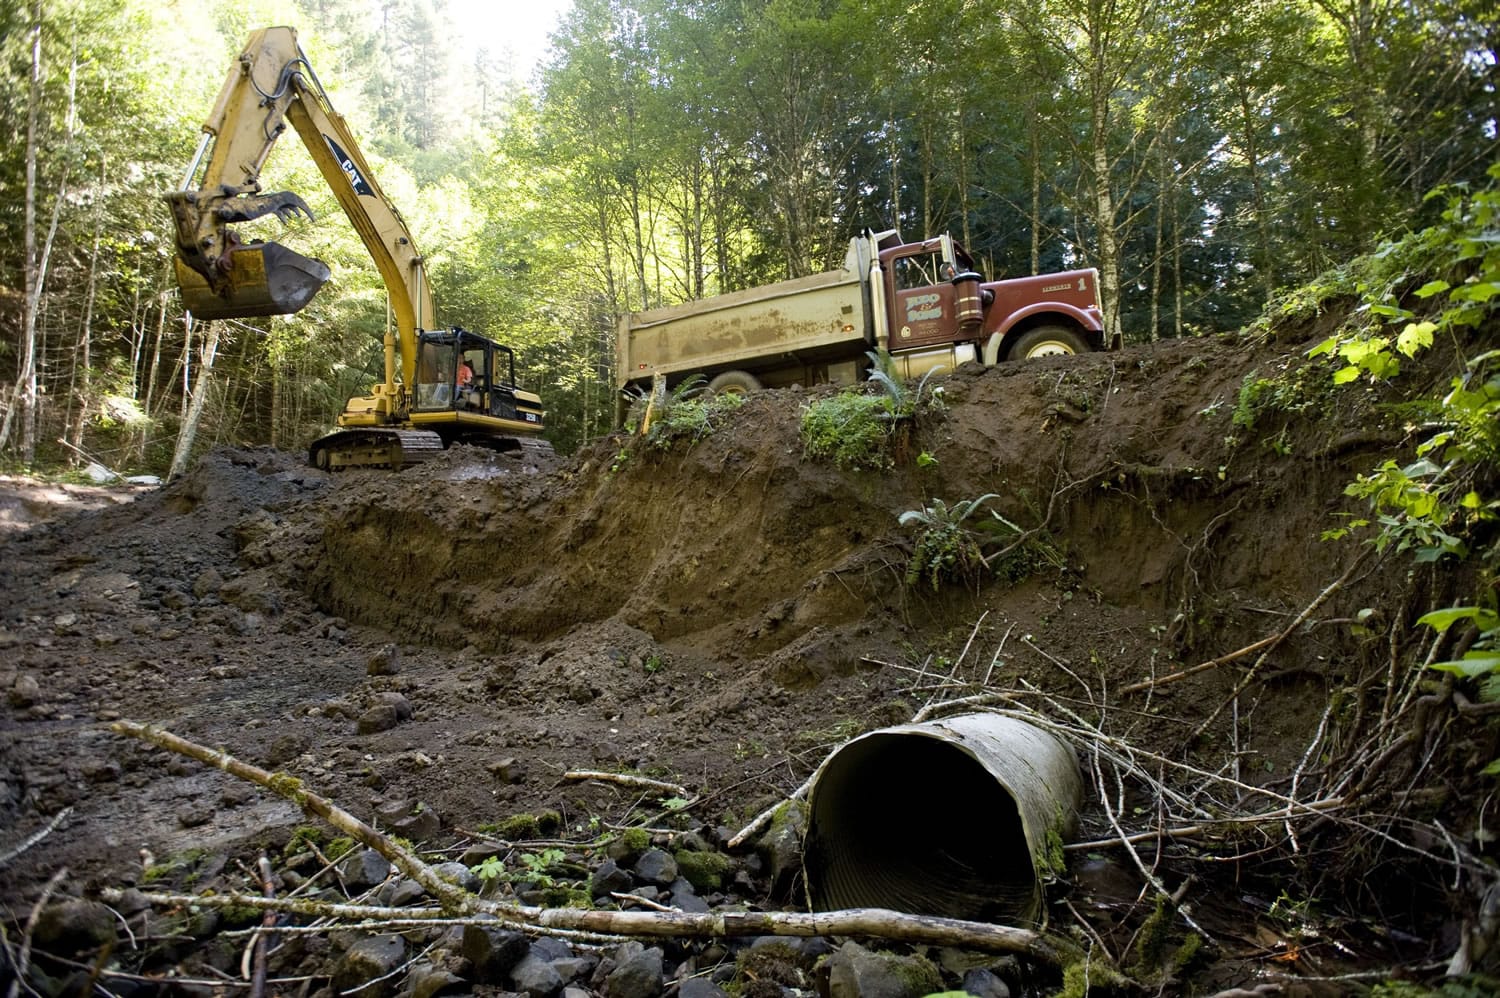 An excavator digs into an old Forest Service road bed at a crossing over Youngman Creek, a tributary of the Wind River, where a culvert blocks passage of threatened steelhead and native cutthroat trout. The Gifford Pinchot National Forest won a three-year, $900,000 federal grant to improve fish passage at sites like this across the forest.